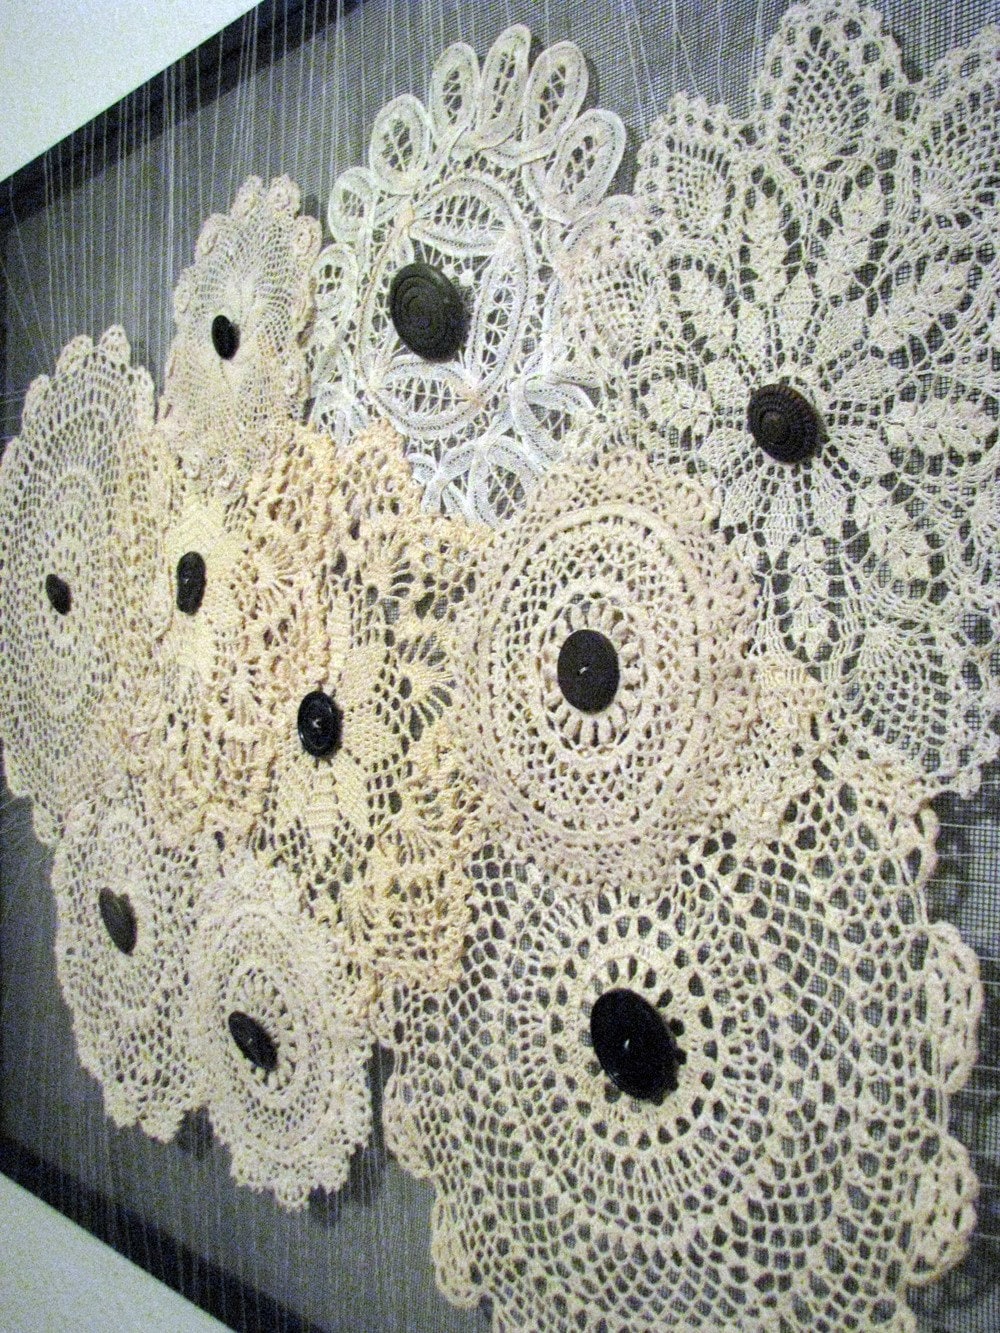 Vintage Doily Wall Art by MadeByMEH on Etsy